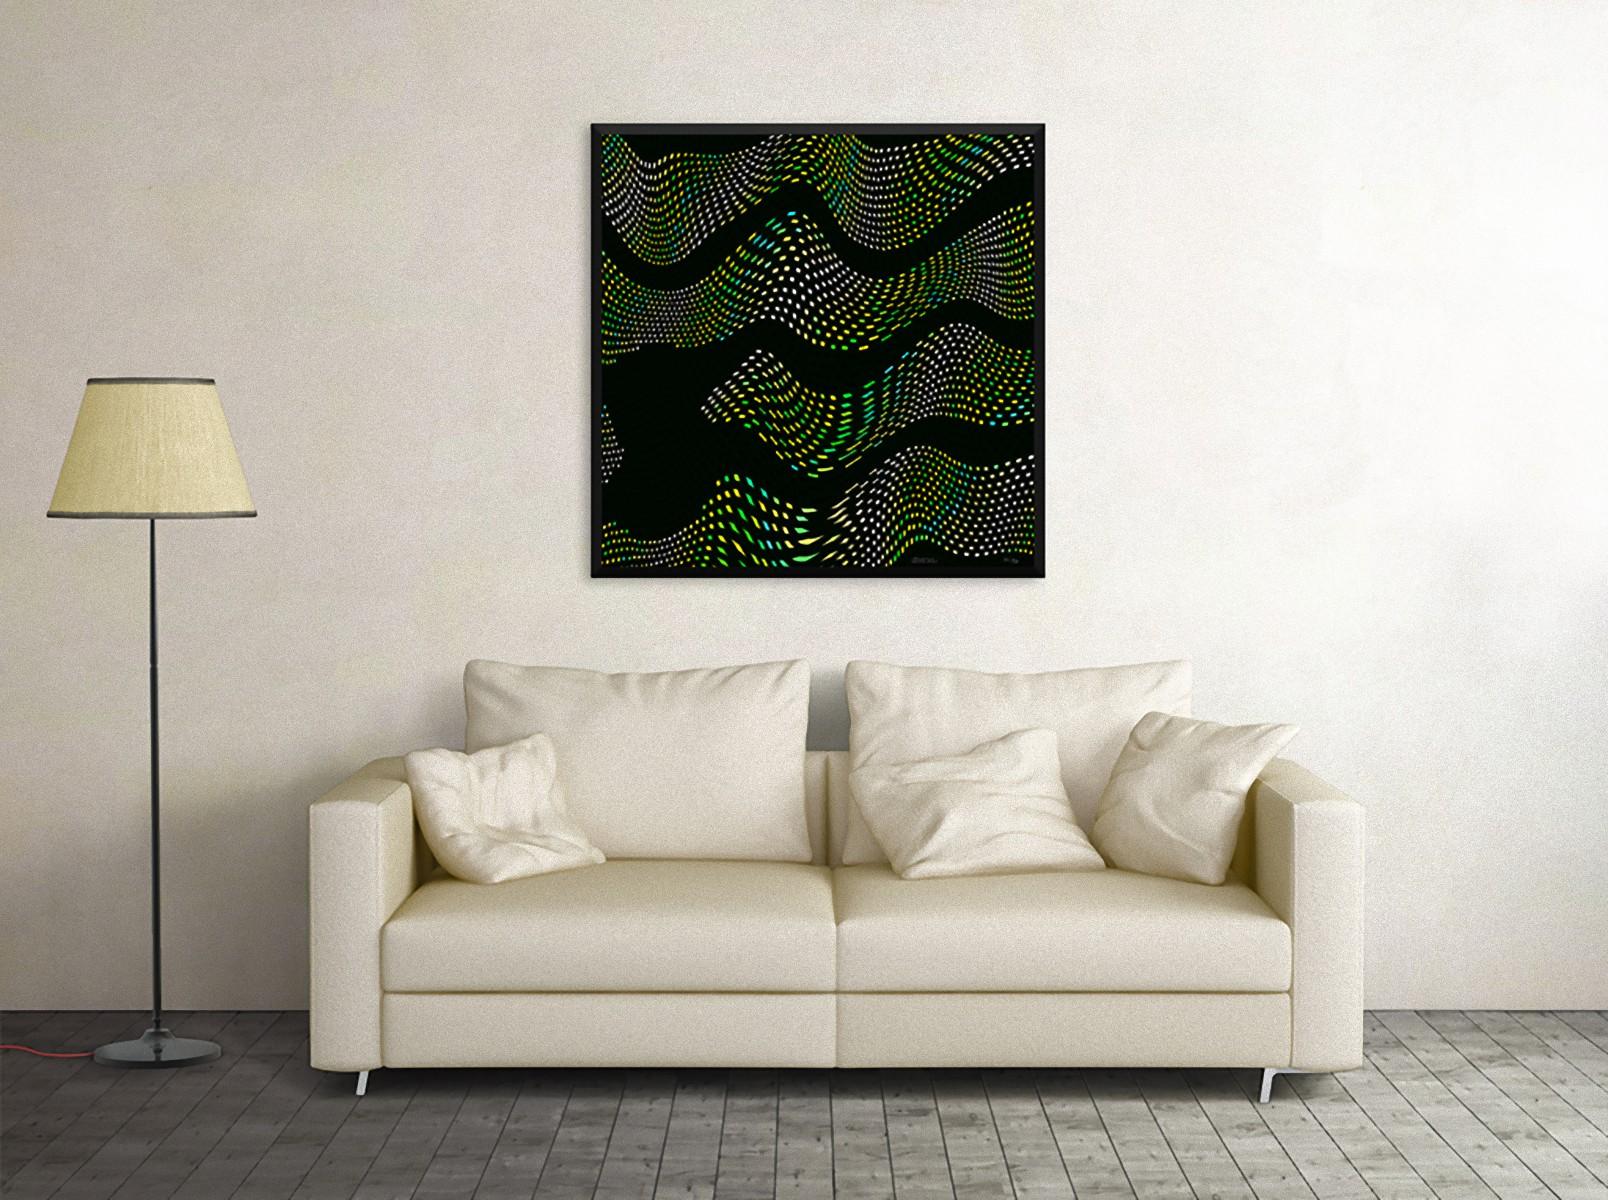 Trumpet B Major  is an enchanting  giclée print realized by the contemporary artist  Dadodu in 2017 .

This original artwork shows an abstract composition with music notes playing in a virtual black space, creating the effect of a melody. This print